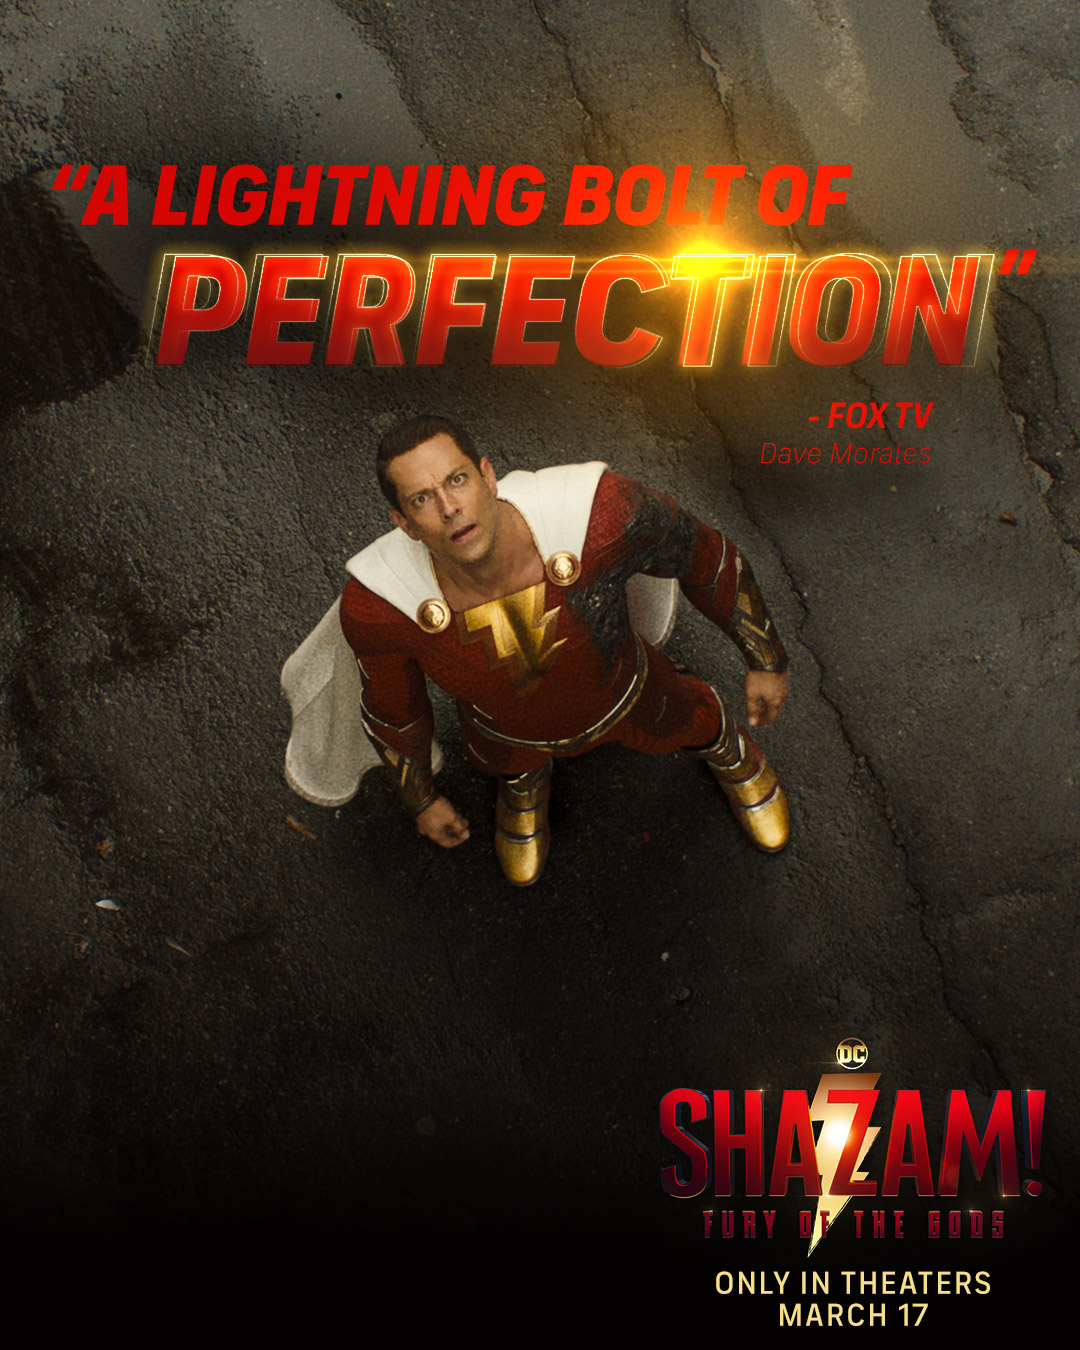 New Trailer for “Shazam! Fury of the Gods” - In Theaters March 17